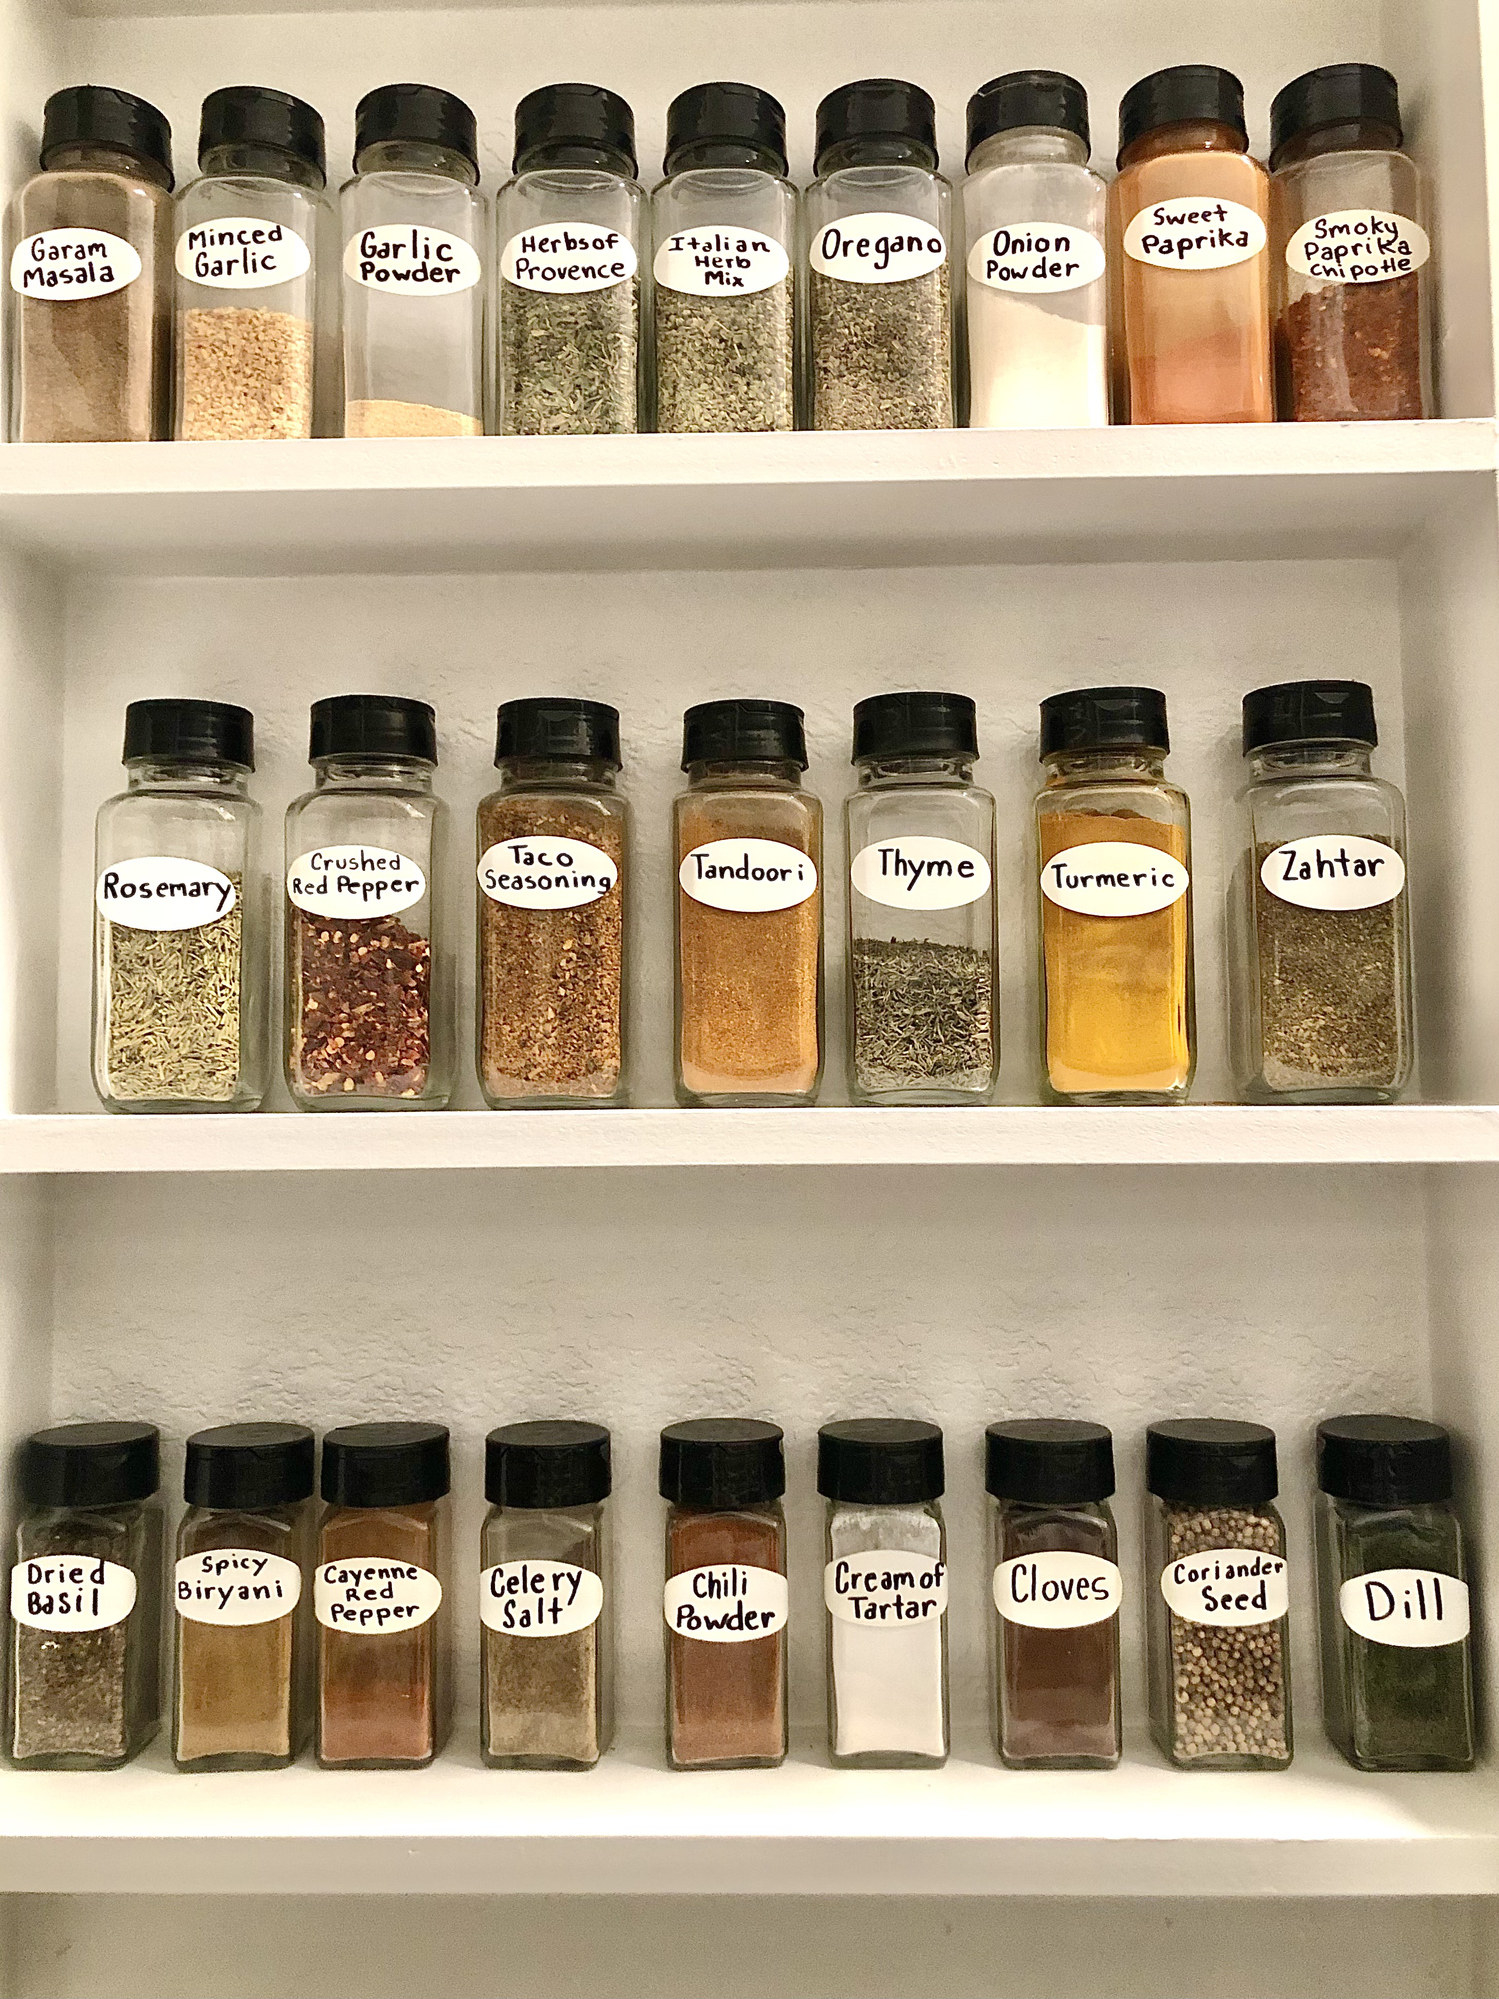 A spice cabinet with labeled spices.